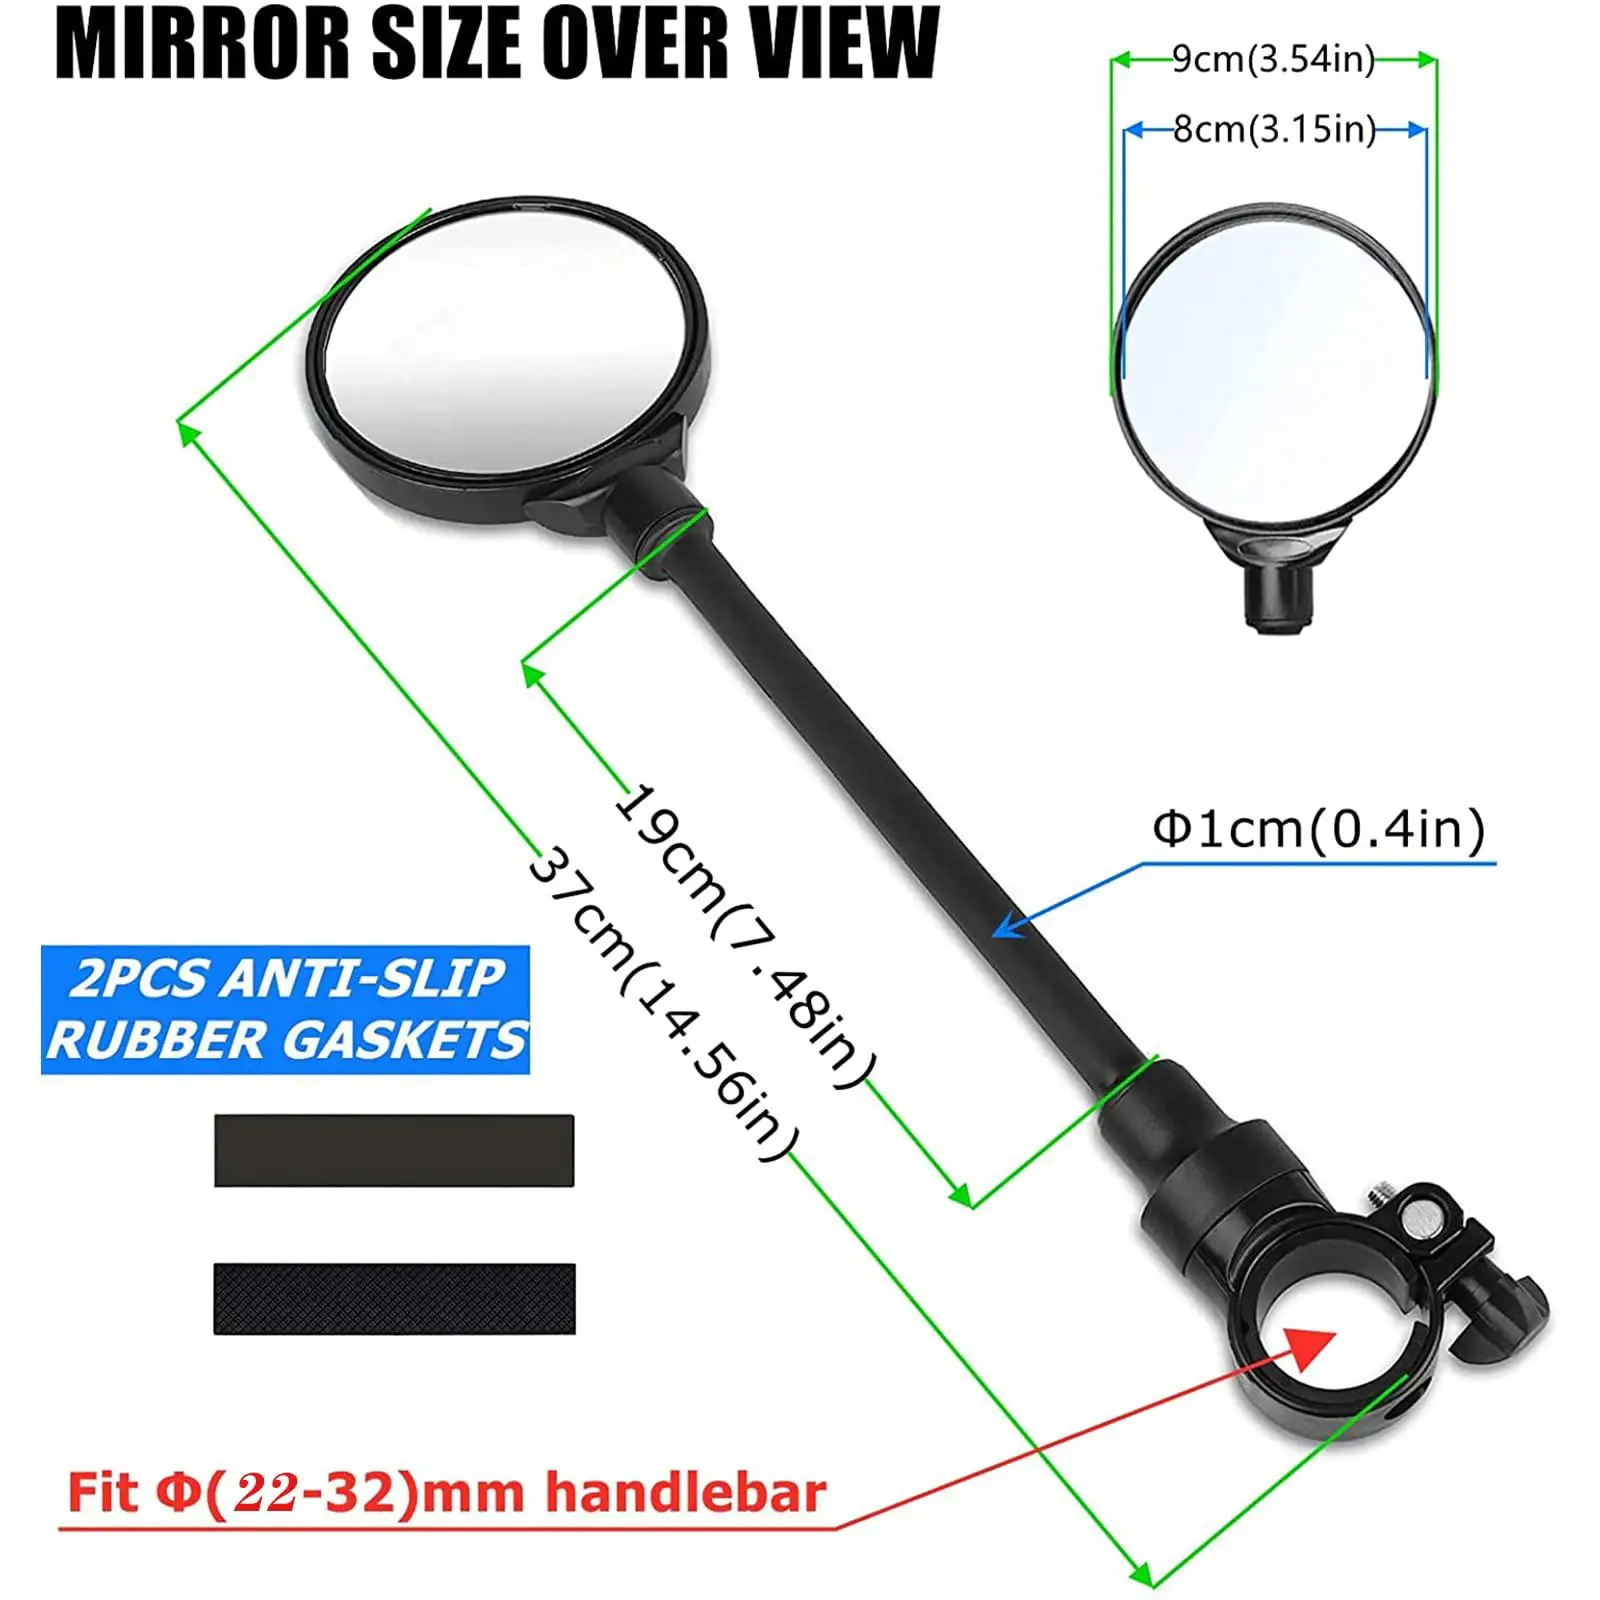  Mirror Convex Safety Mirror Handlebar Mounted  Adjustable Stable